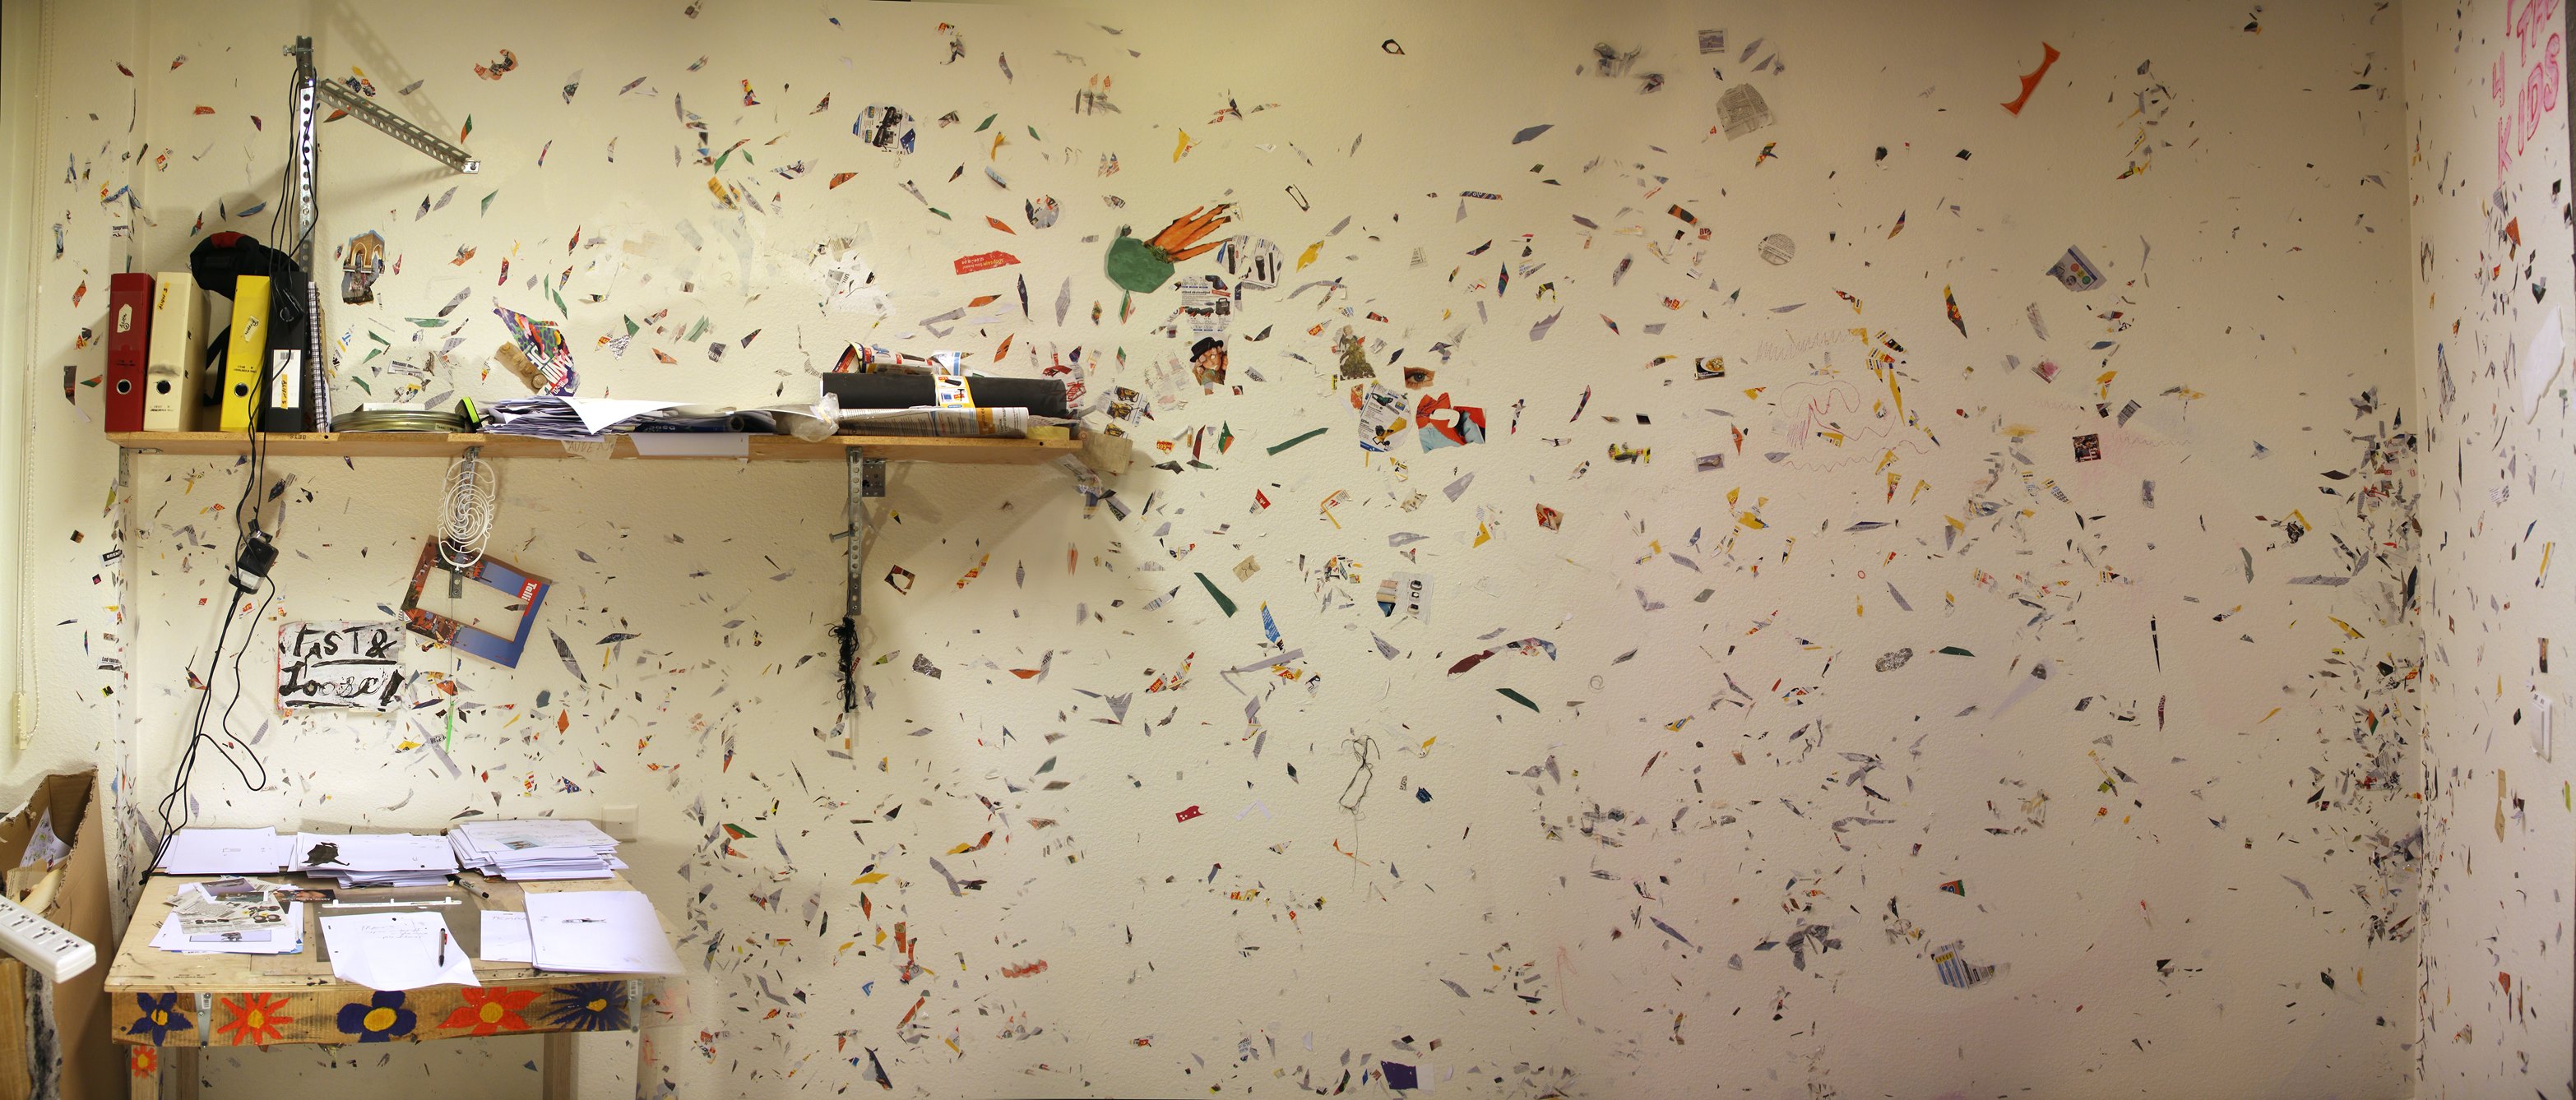 Messy studio with paper cutouts covering wall